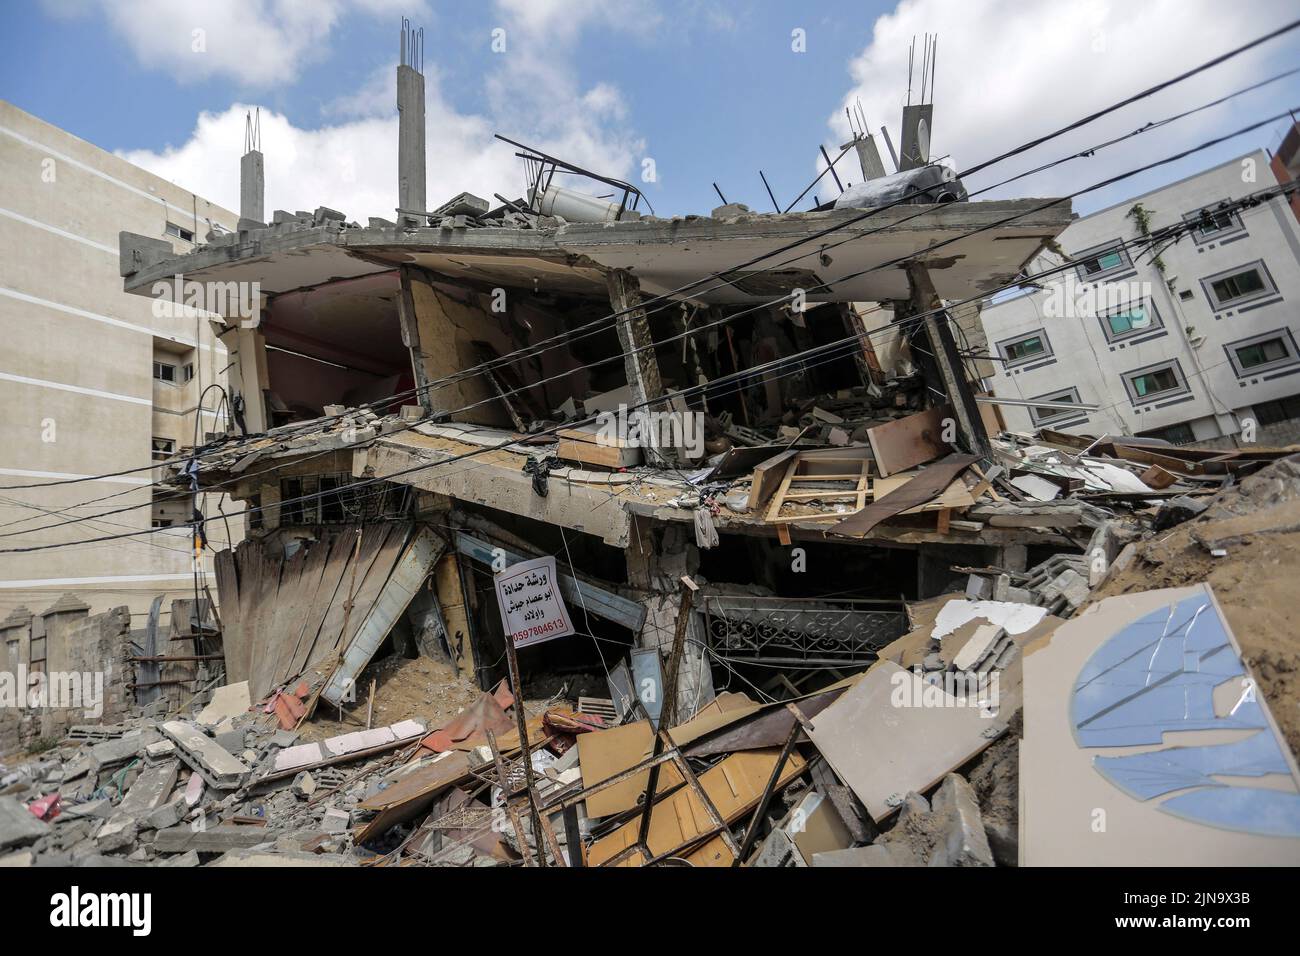 Gaza City, The Gaza Strip. August 10, 2022, Gaza City, The Gaza Strip, Palestine: The ruins of a destroyed house after the Israeli attacks on Gaza, August 10, 2022. On August 07 at 23:30 local time (20:30 GMT), Israel and Palestinian militants in Gaza confirmed an Egyptian-brokered ceasefire entered three days after an exchange of rocket attacks and air strikes that killed at least 44 Palestinians and injured 360 others, according to the Palestinian Ministry of Health. Credit: ZUMA Press, Inc./Alamy Live News Stock Photo